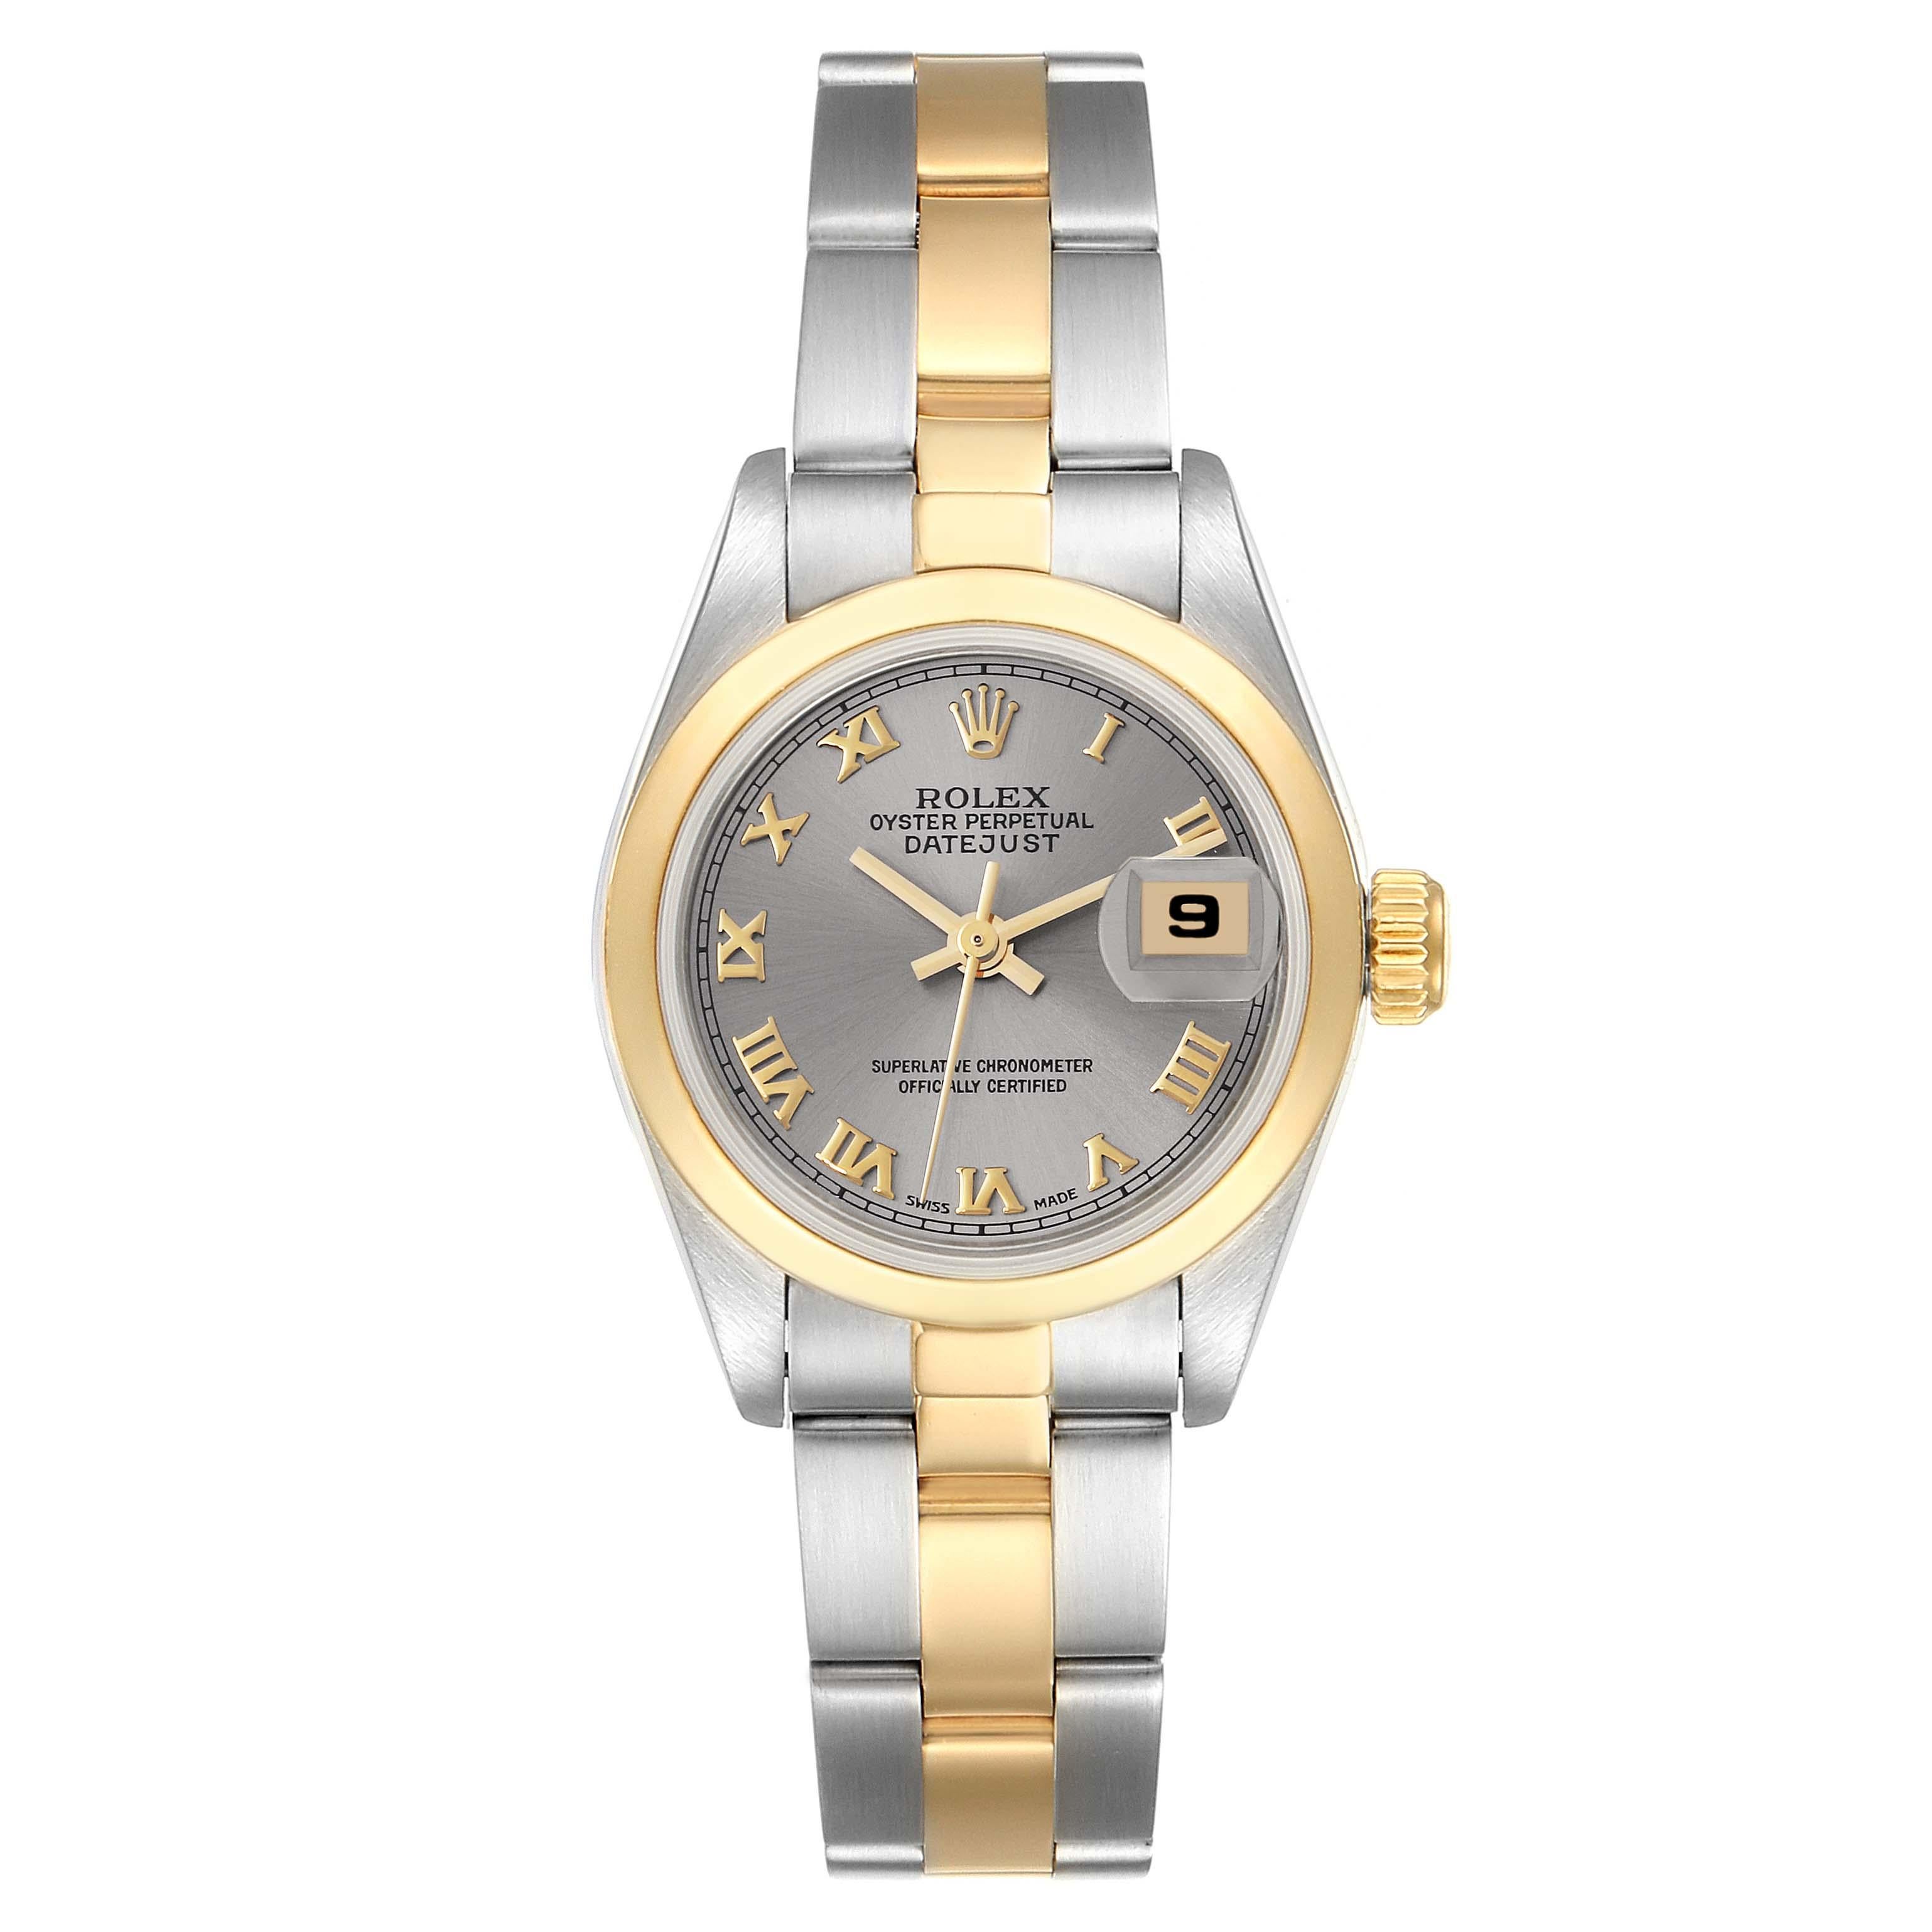 Rolex Datejust Steel Yellow Gold Slate Roman Dial Ladies Watch 69163. Officially certified chronometer automatic self-winding movement. Stainless steel oyster case 26.0 mm in diameter. Rolex logo on the crown. 18k yellow gold smooth bezel. Scratch